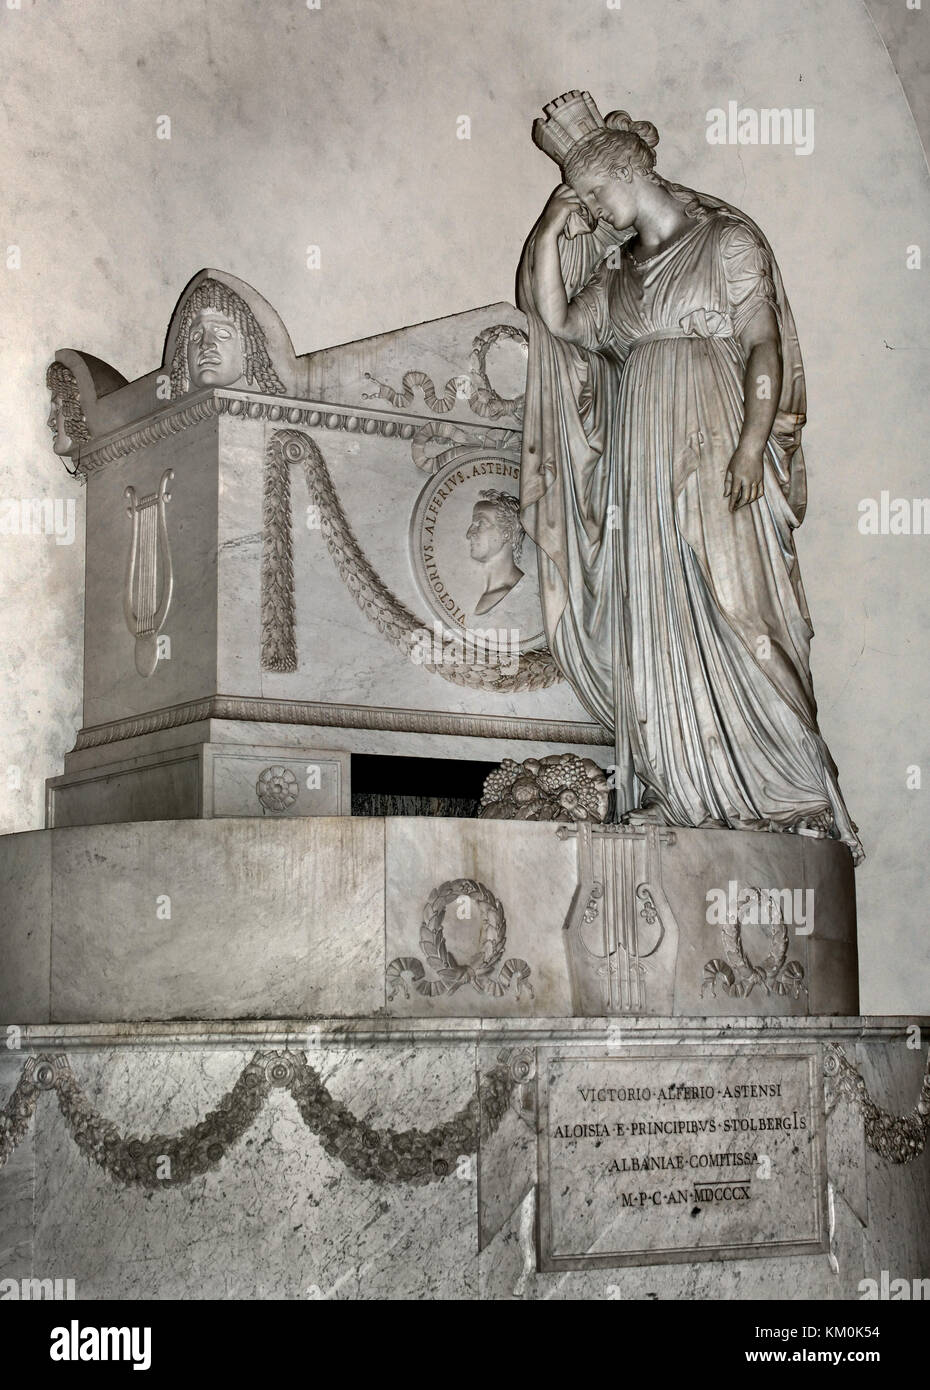 Count Vittorio Alfieri  1749 –  1803 was an Italian dramatist and poet, considered the 'founder of Italian tragedy. Funerary monument - Tomb in the Santa Croce ( The Basilica di Santa Croce is the principal Franciscan church in Florence ) Italy Stock Photo